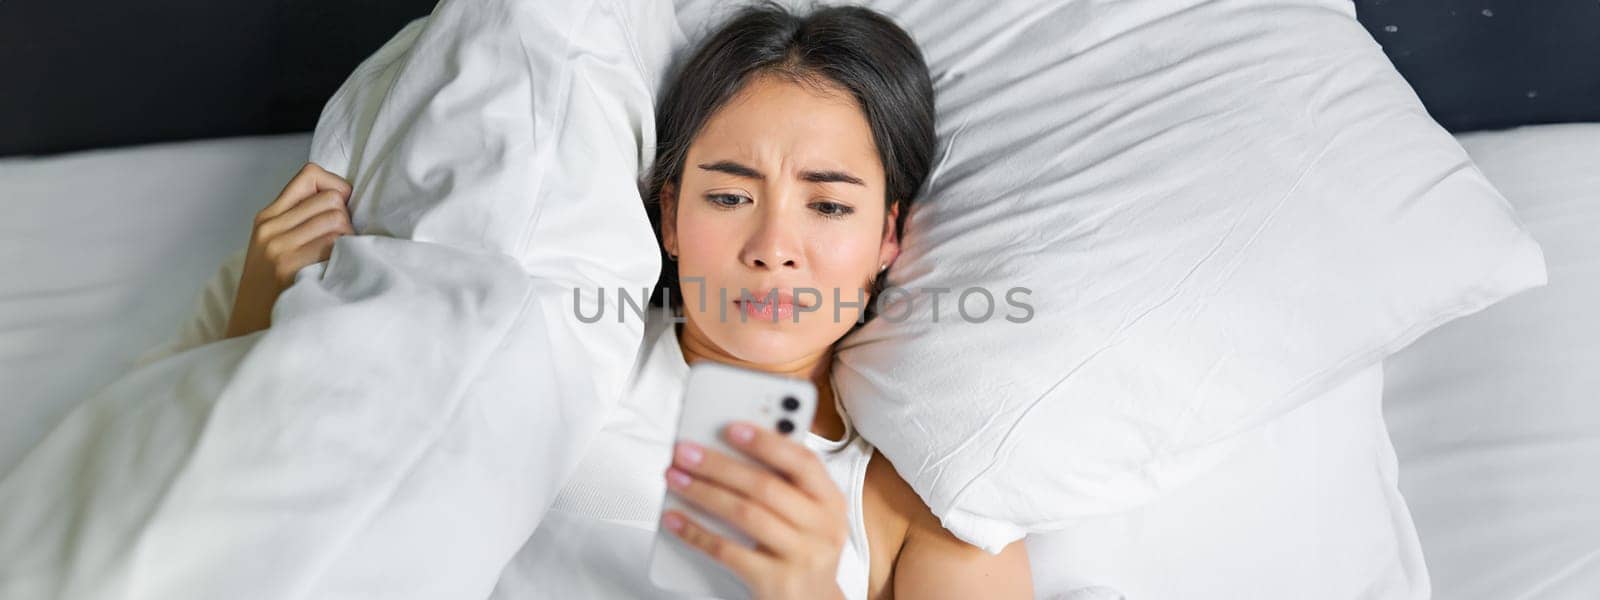 Close up portrait of asian girl lying in bed, looking at smartphone concerned, waking up late and staring at her alarm clock on mobile phone.